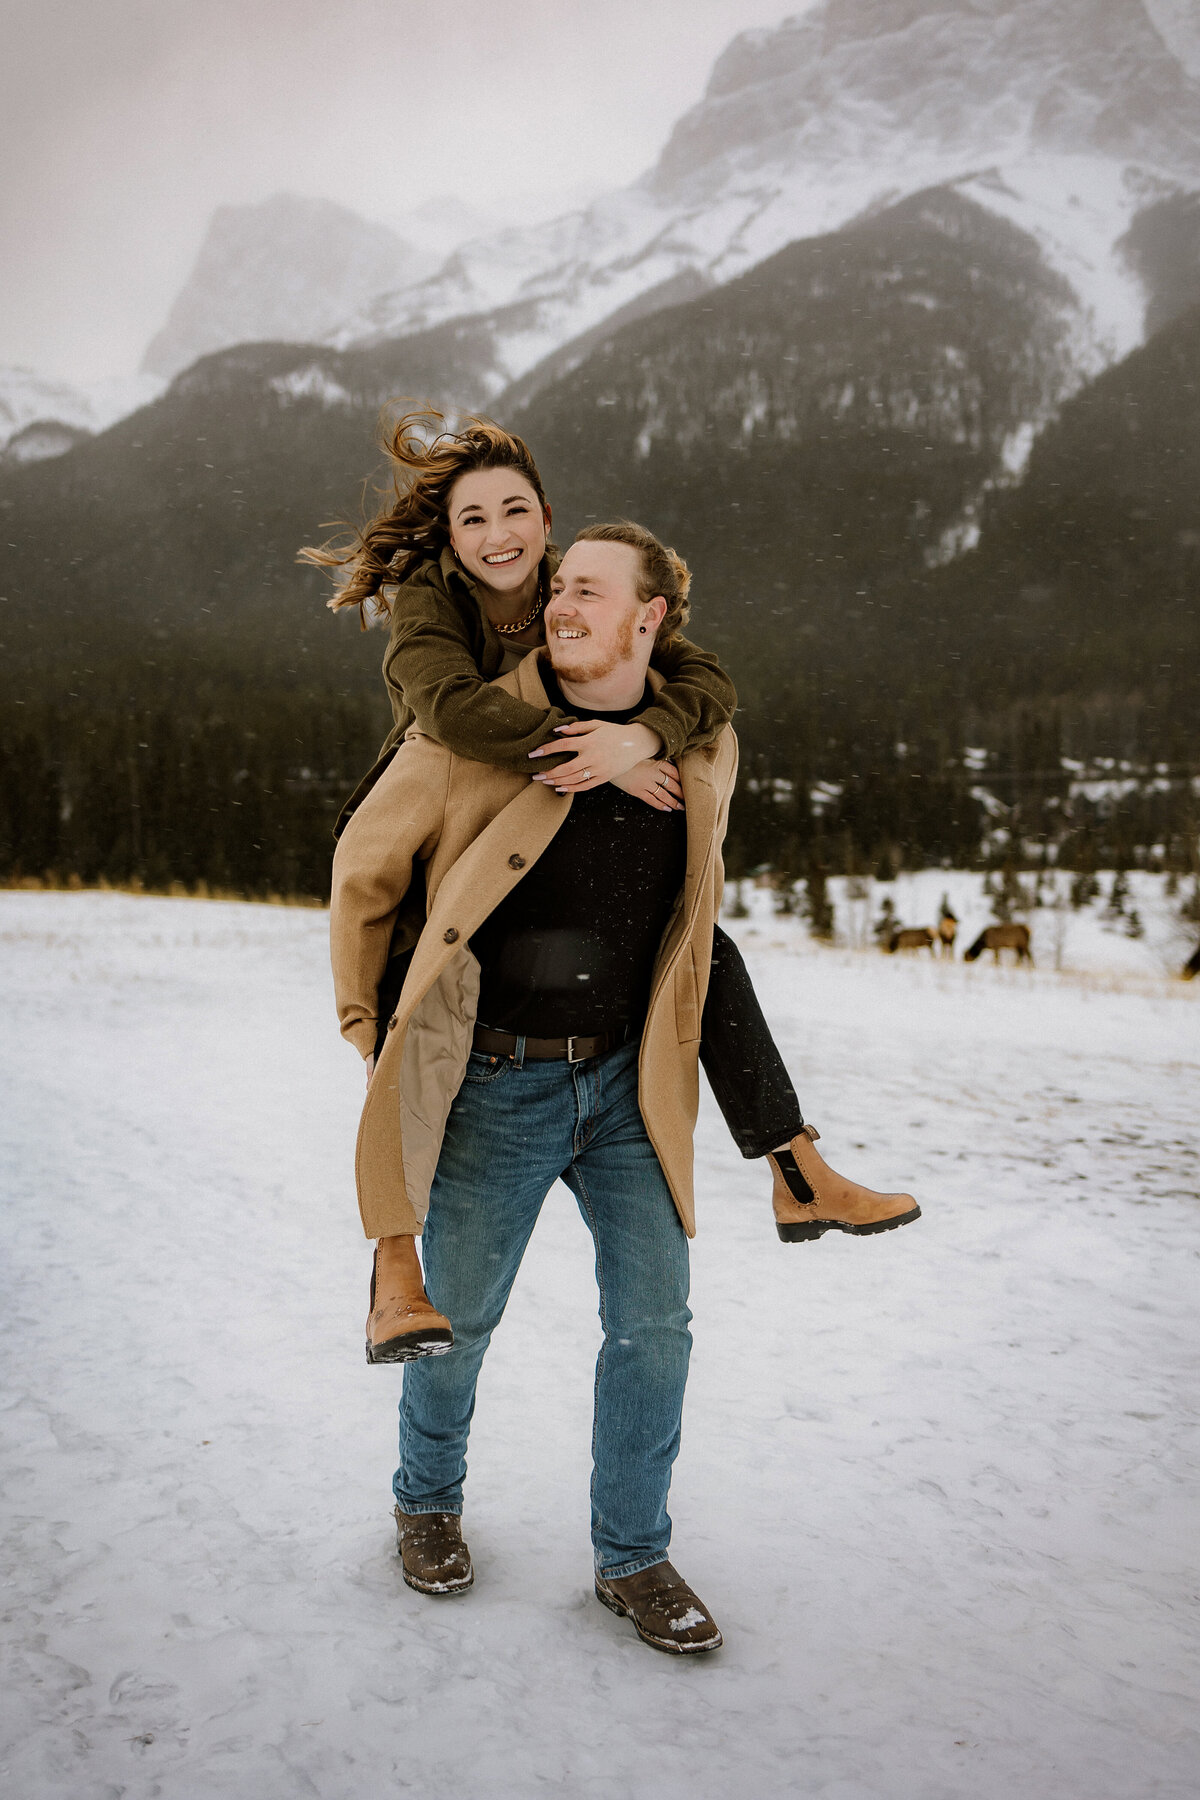 "Experience family moments beyond Calgary, where adventure and scenic beauty meet. Our family photography takes you to places like Banff, Canmore, and the Badlands